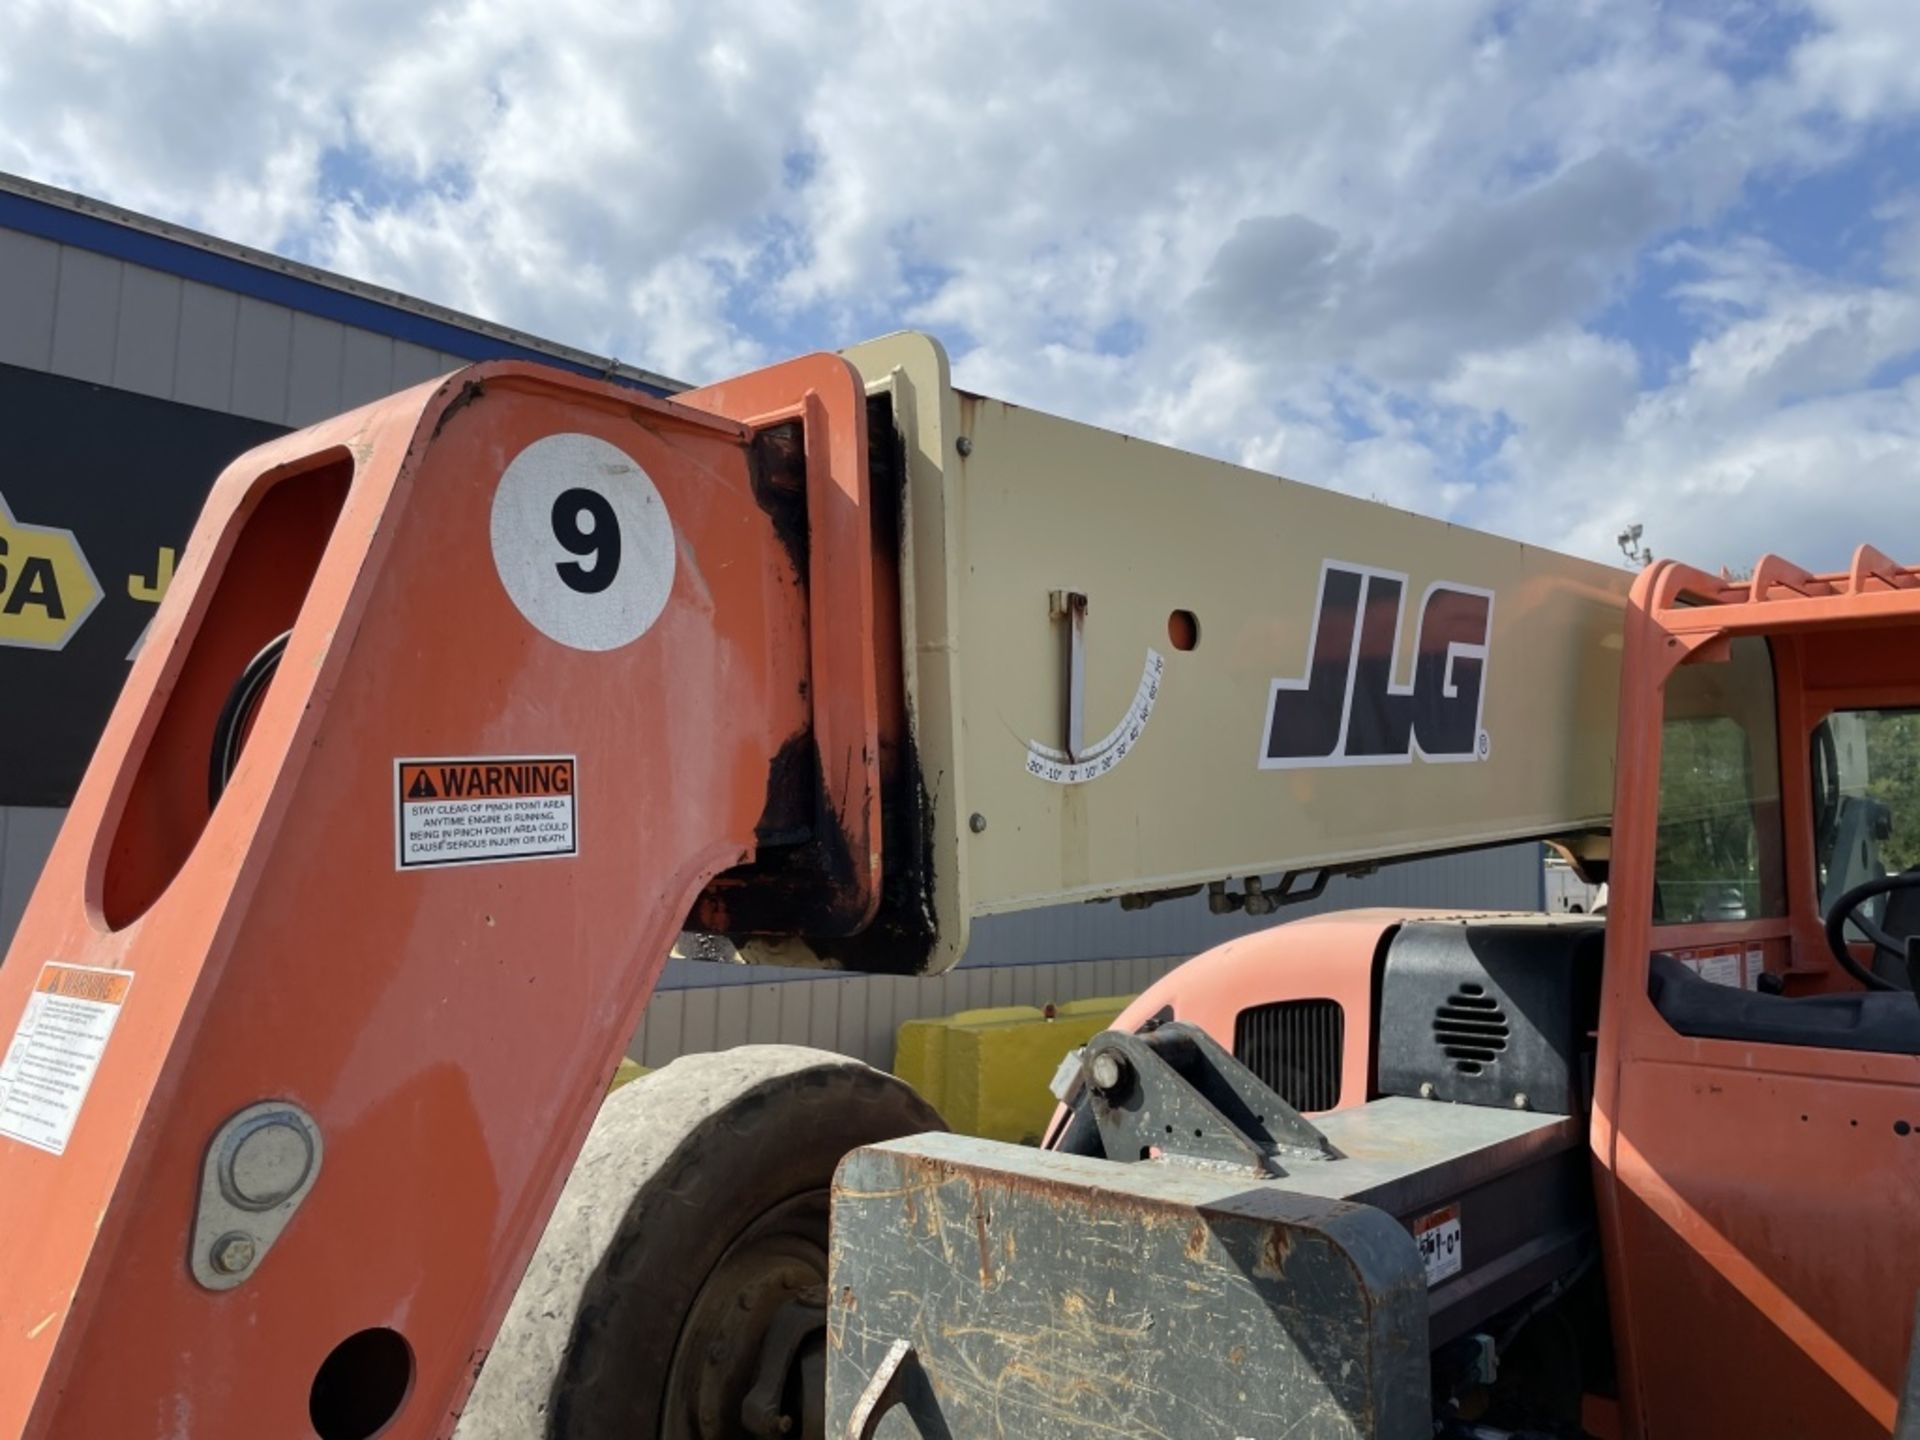 2005 JLG G9-43A Telescopic Forklift - Image 8 of 21